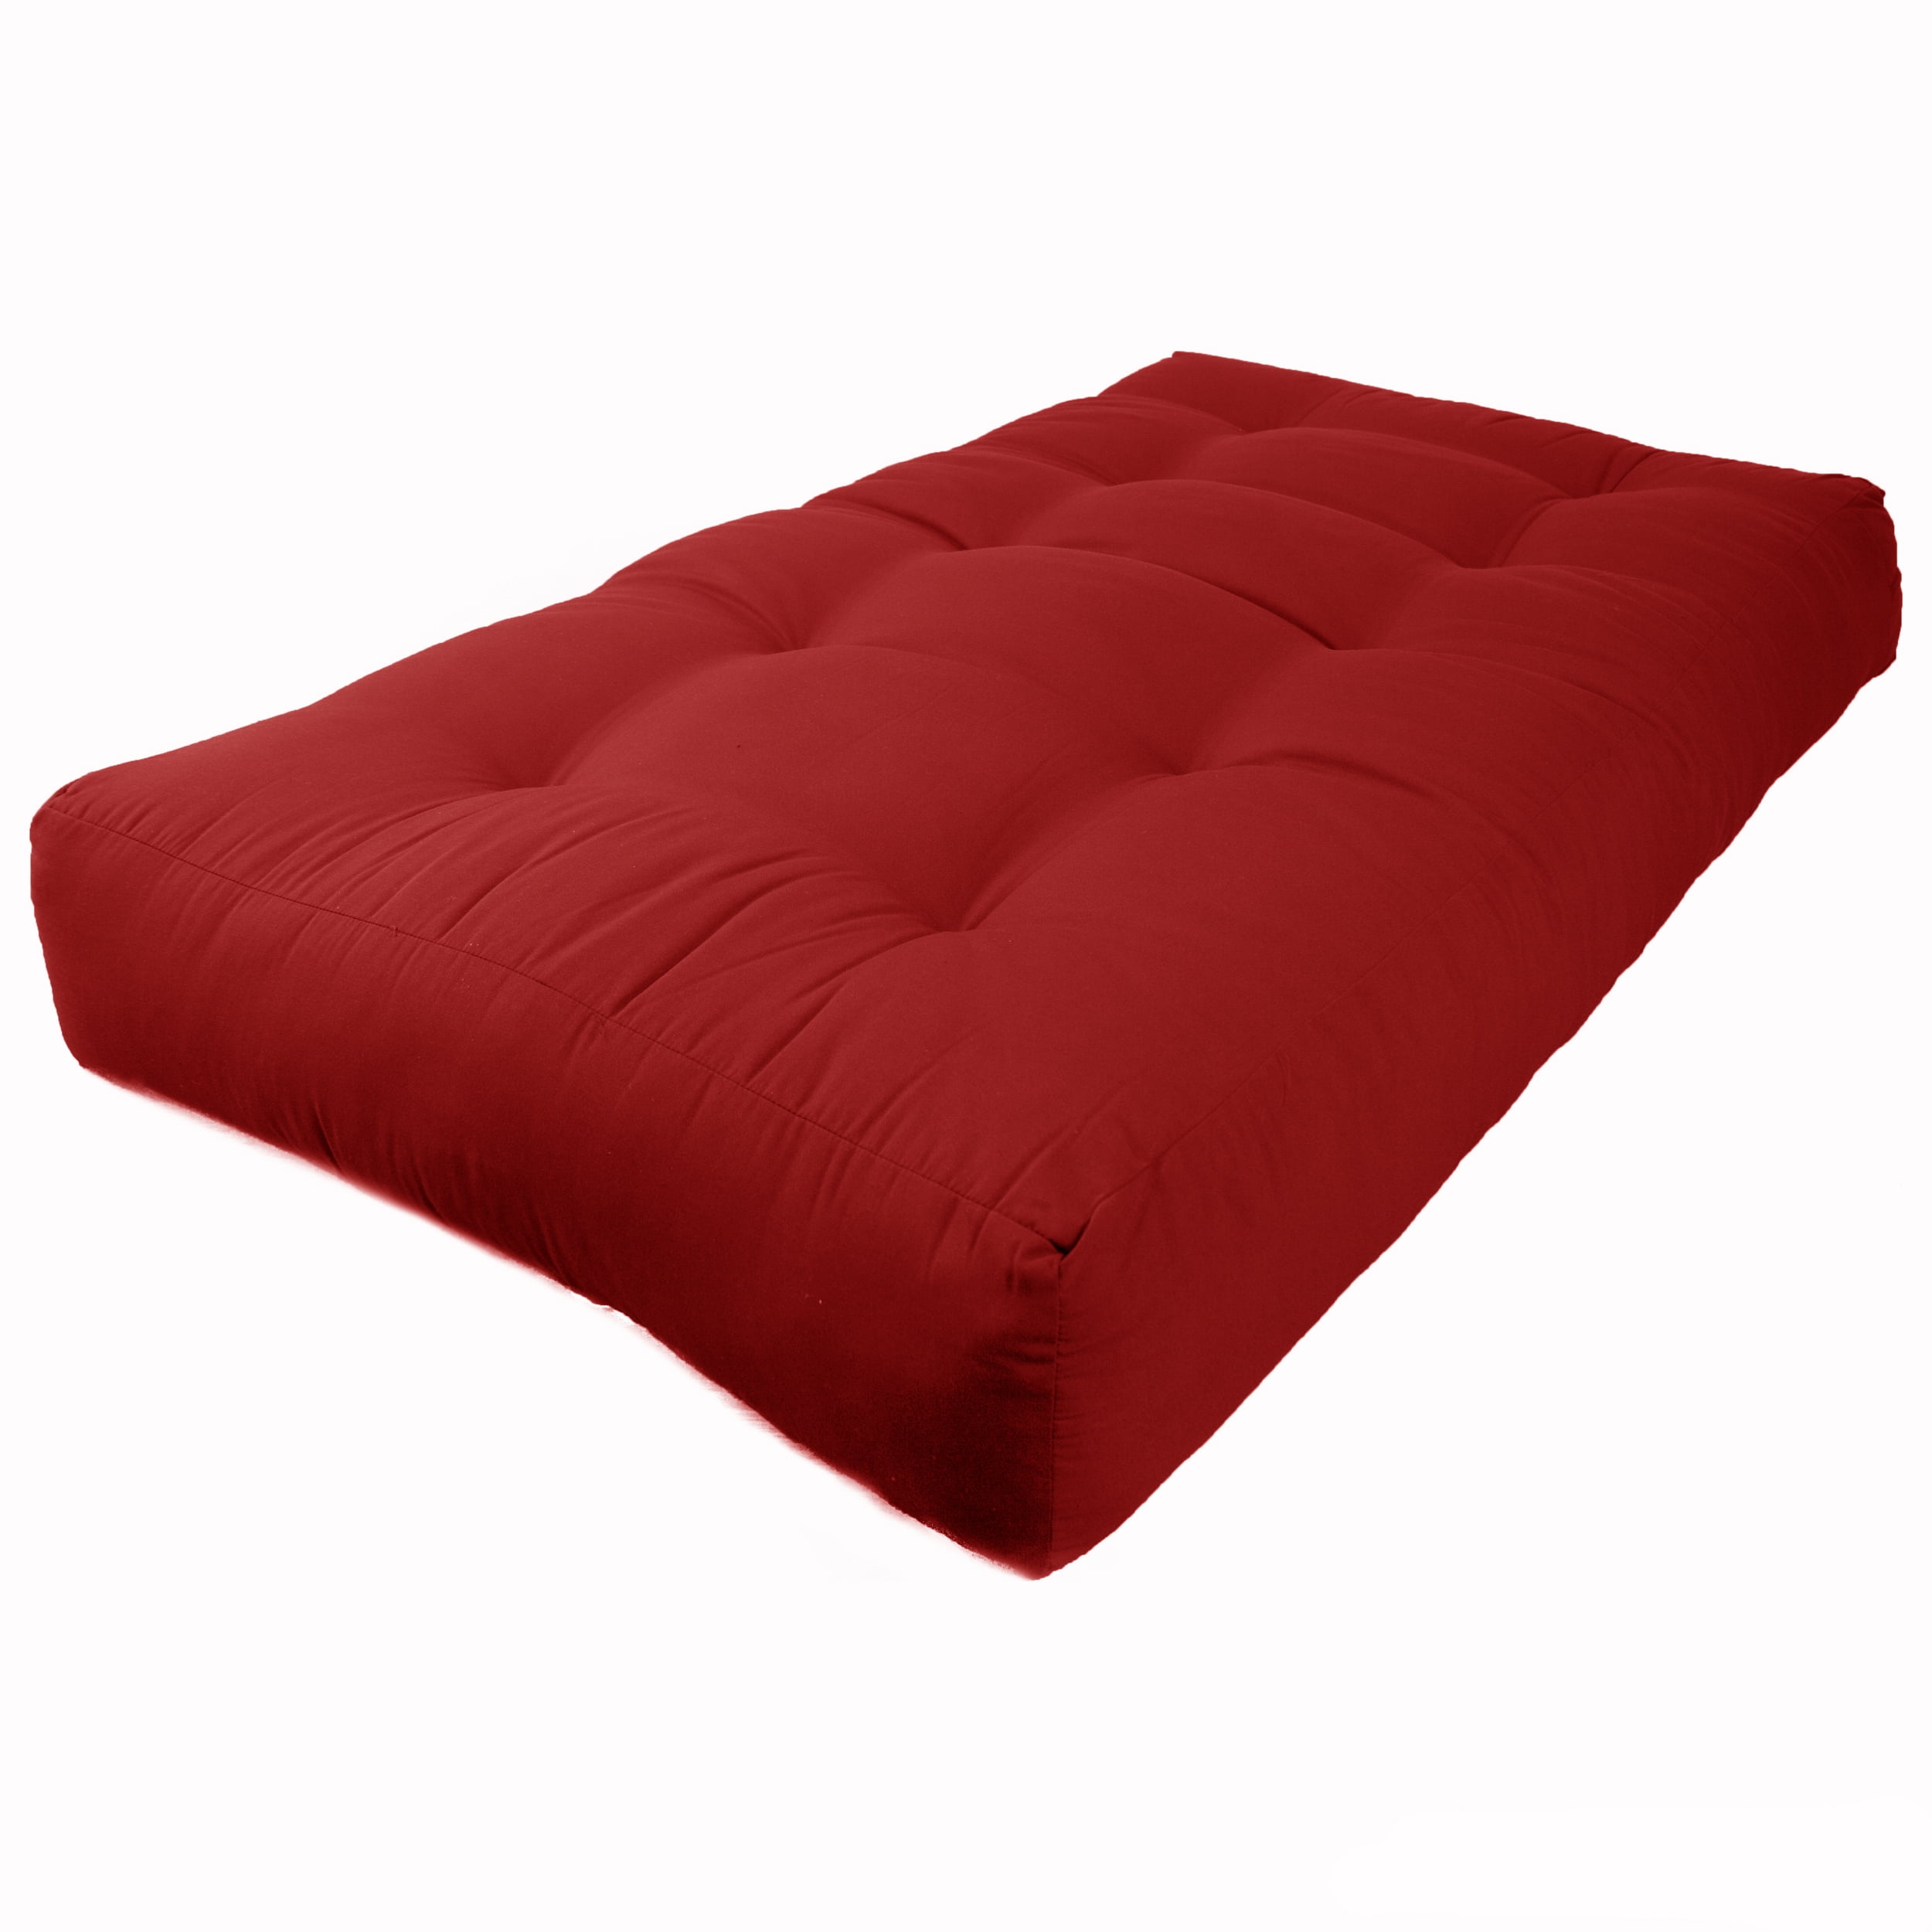 Picture of Blazing Needles 9603-TW-RR 10 in. Renewal Twill Twin Size Futon Mattress, Ruby Red